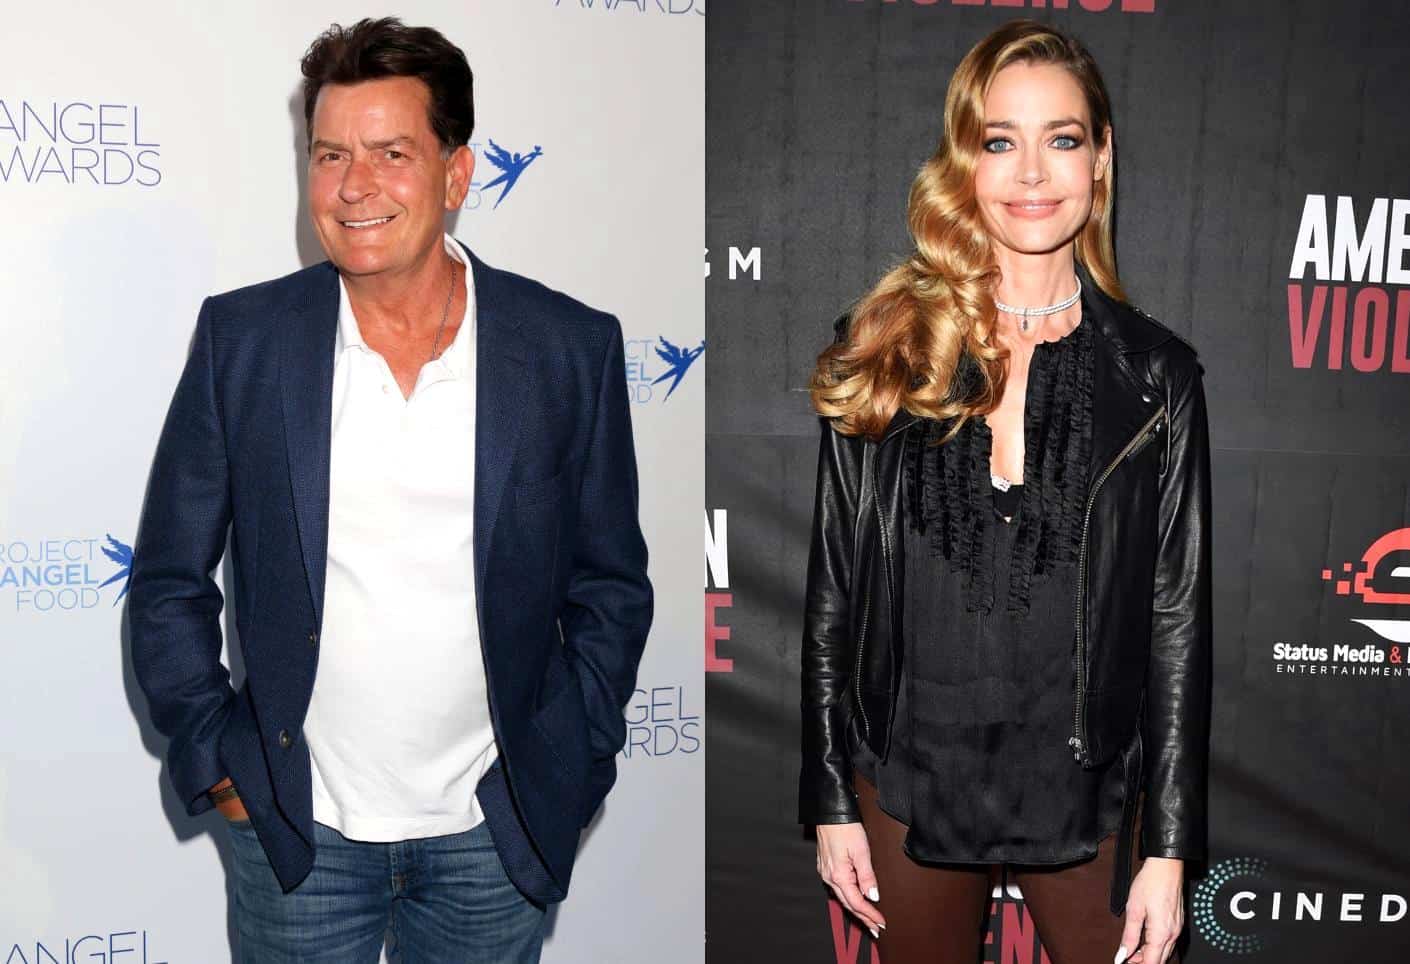 Will Denise Richards' Ex-Husband Charlie Sheen Appear on the 'RHOBH' this Season? He Speaks Out